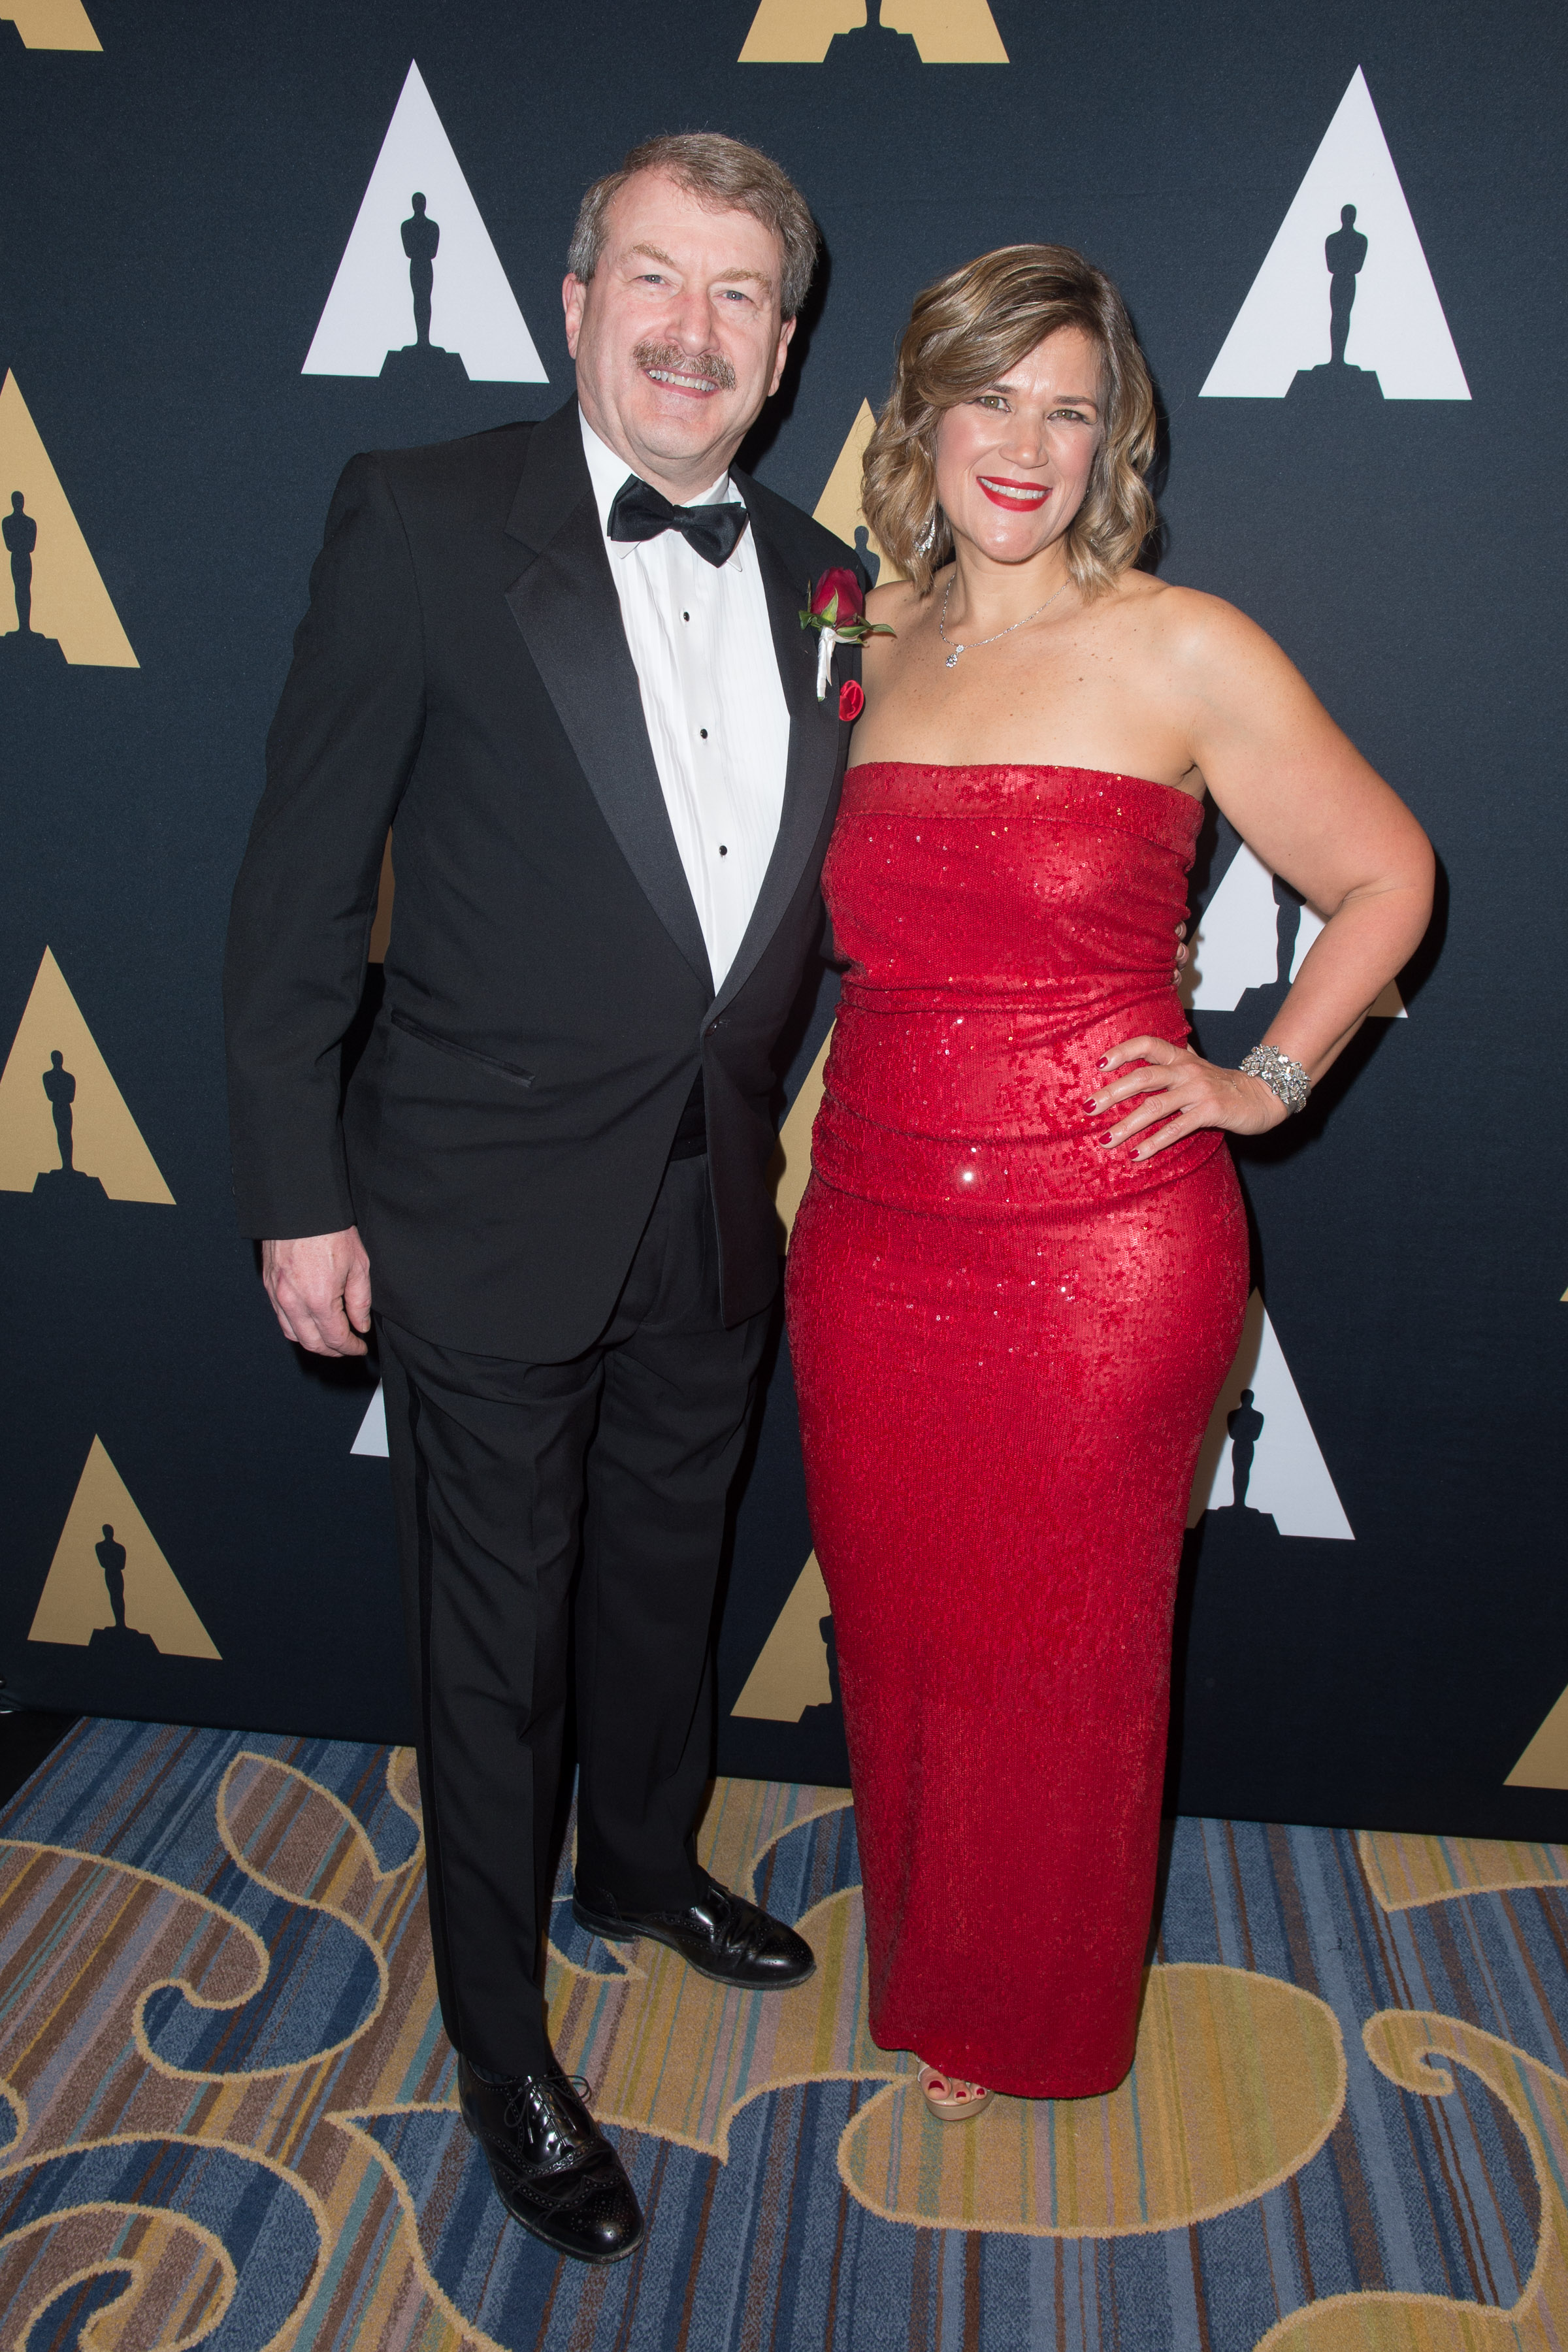 Robert Seidel and Barbara Lange prior to the Academy of Motion Picture Arts and Sciences' Scientific and Technical Achievement Awards Photo Credit: Matt Petit / ©A.M.P.A.S.